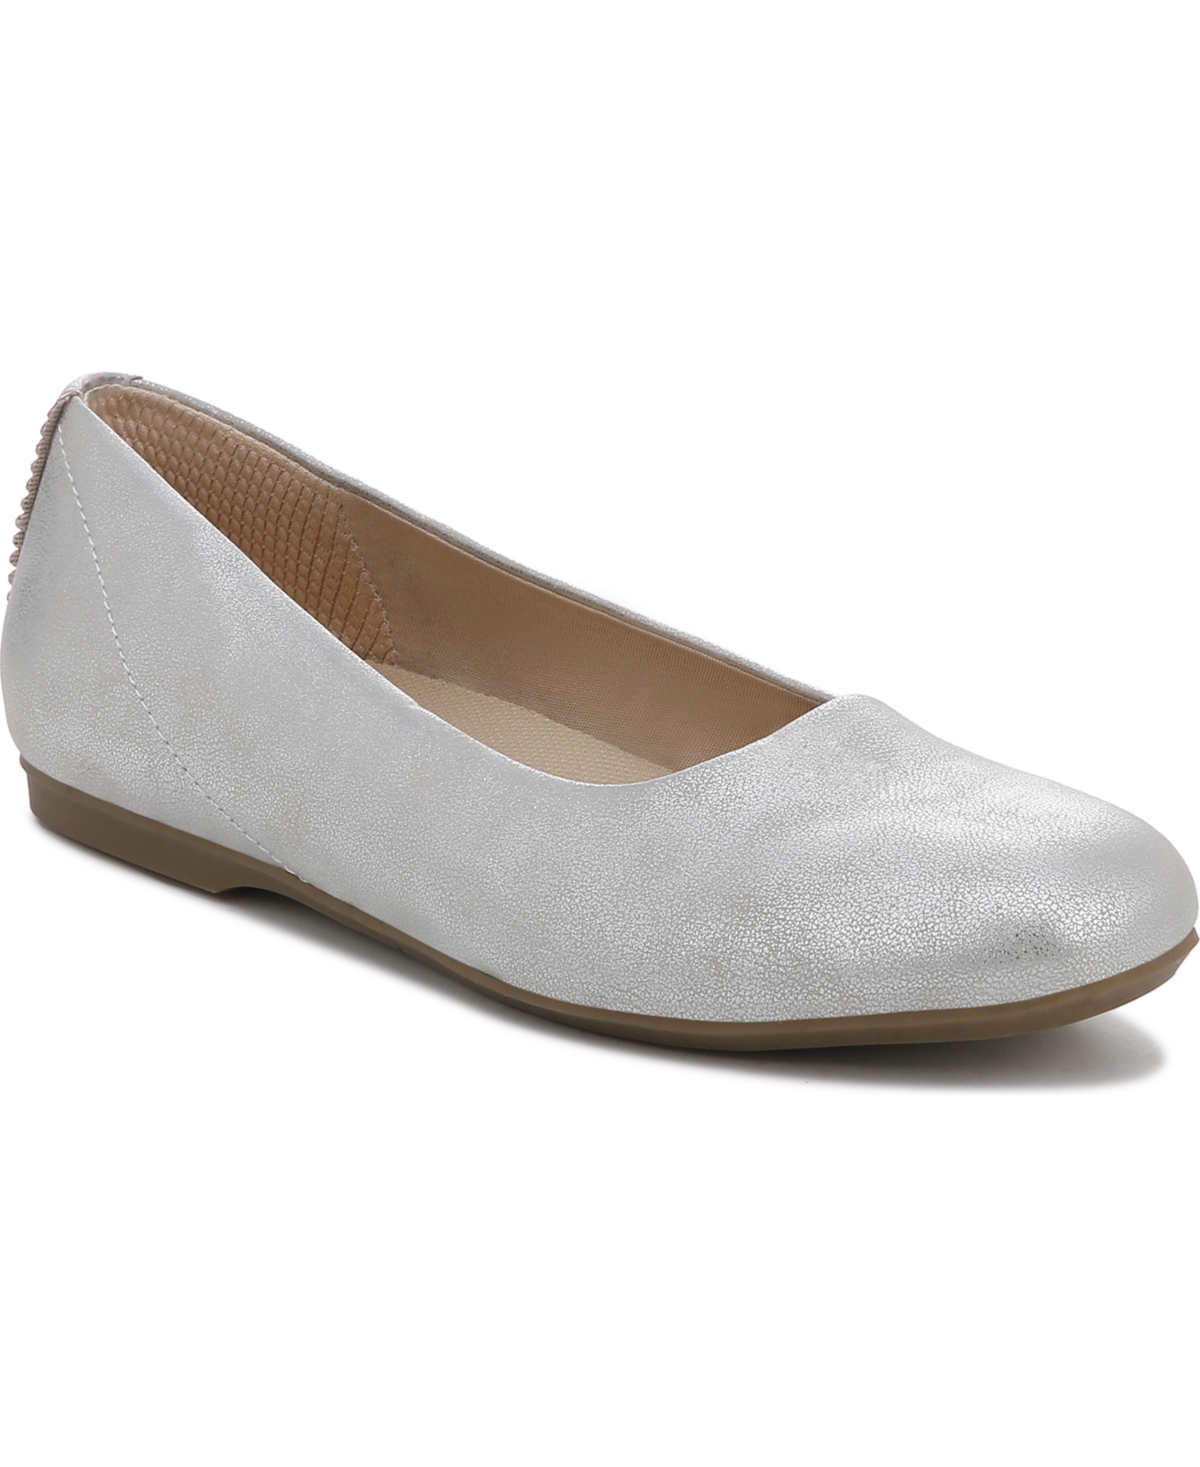 Women's Wexley Flats - Silver Faux Leather